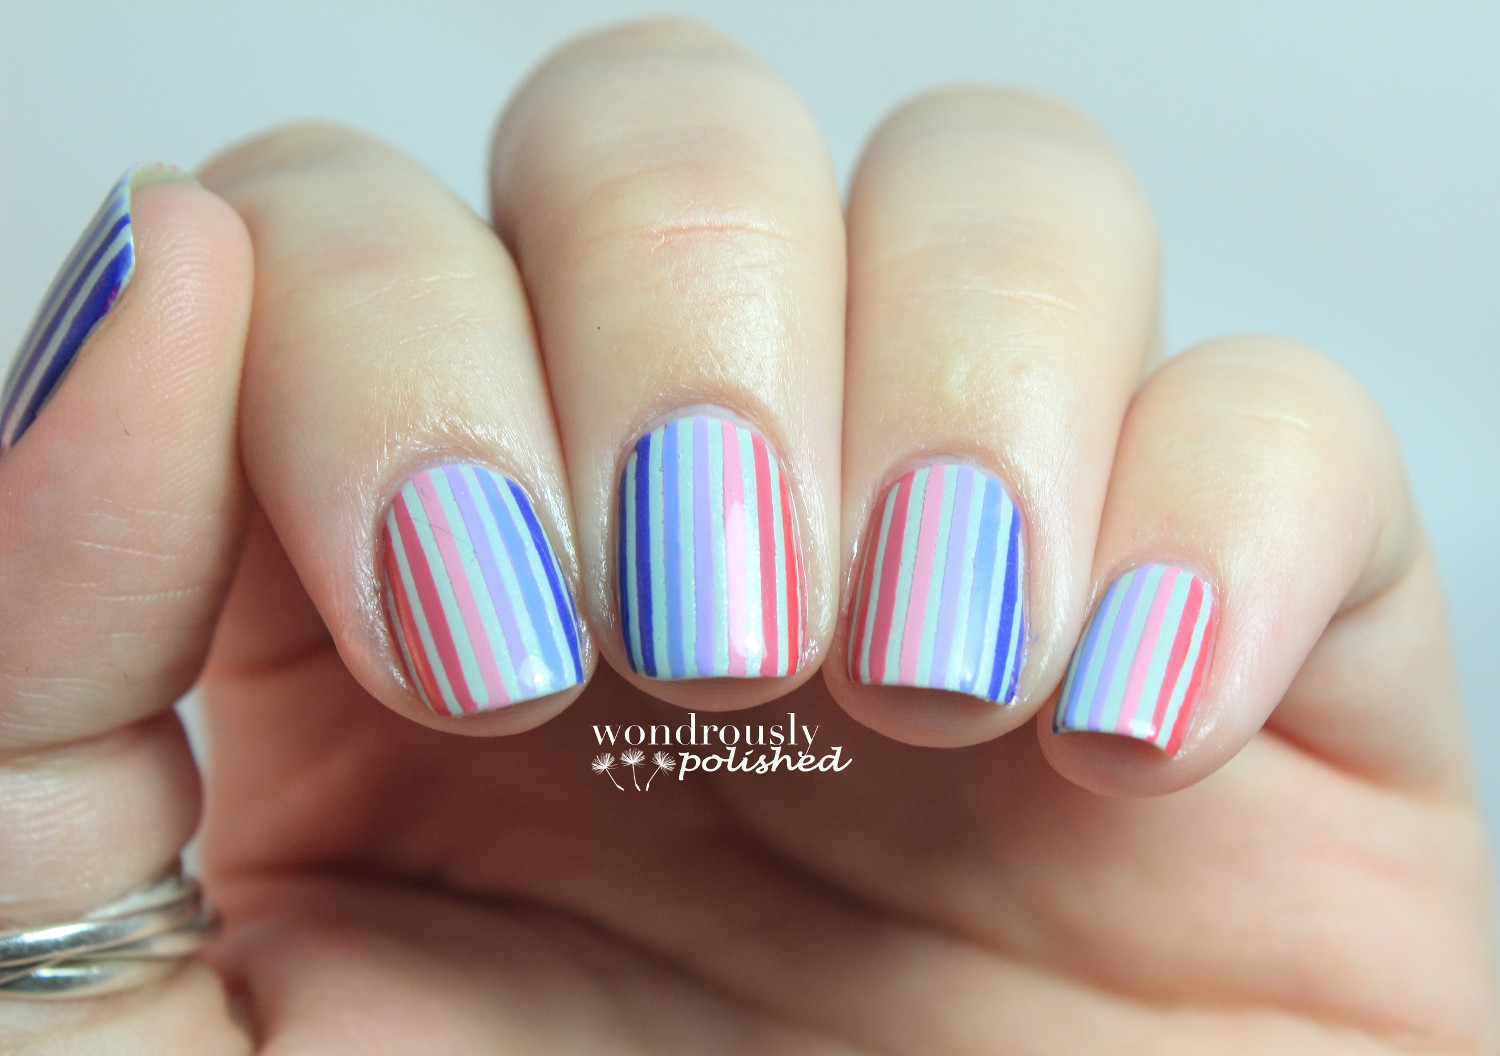 Nail Designs With Stripes
 Wondrously Polished 31 Day Nail Art Challenge Day 12